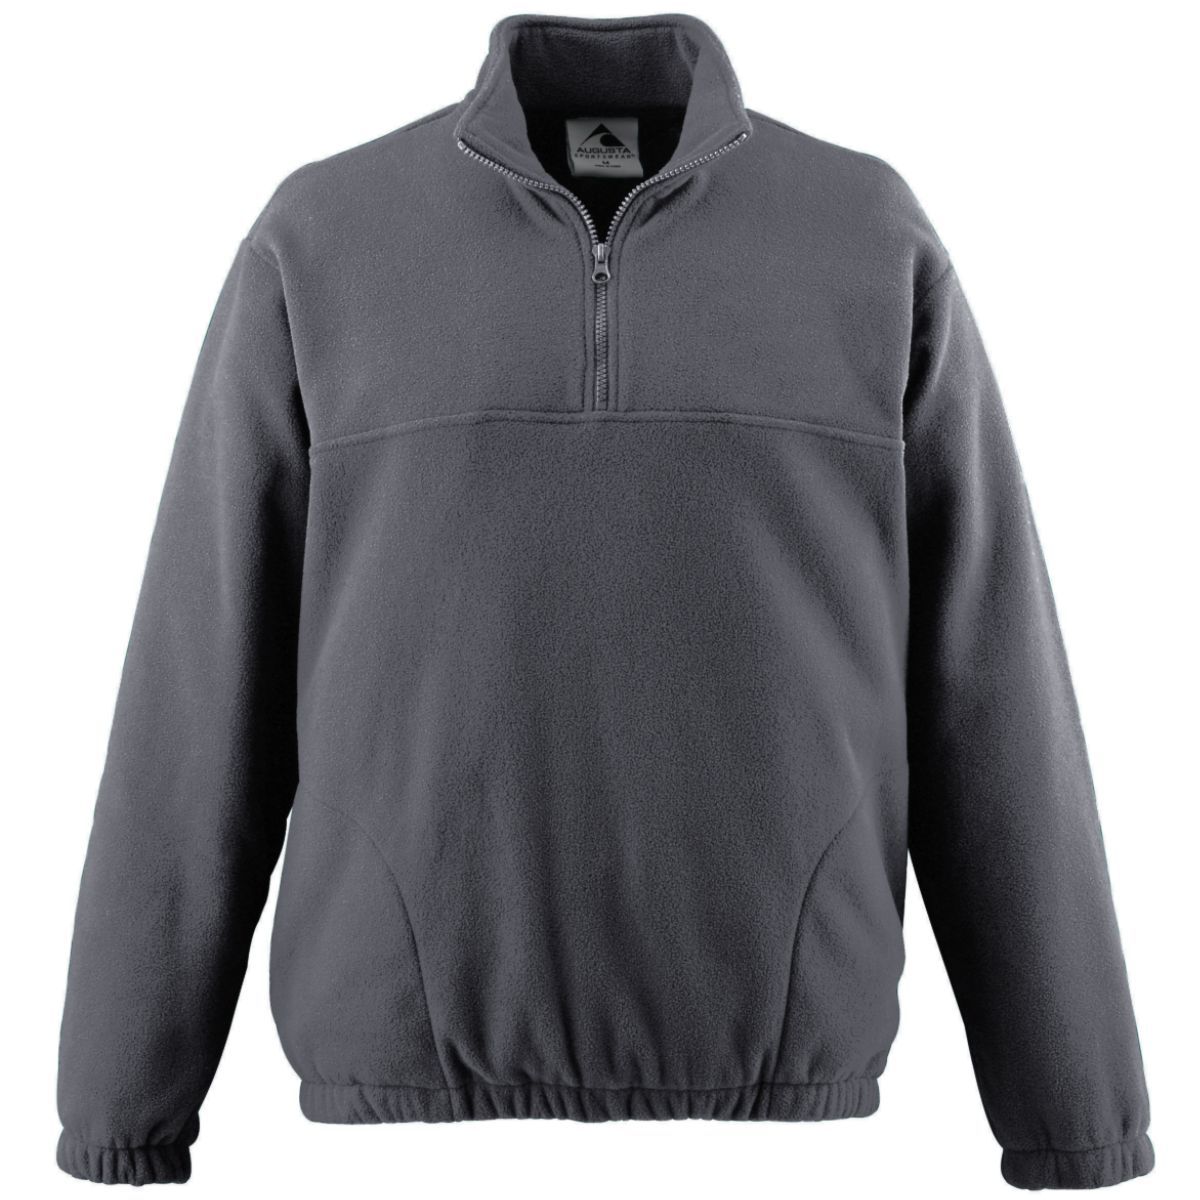 Augusta Sportswear Chill Fleece Half-Zip Pullover in Charcoal Heather  -Part of the Adult, Adult-Pullover, Augusta-Products, Outerwear product lines at KanaleyCreations.com